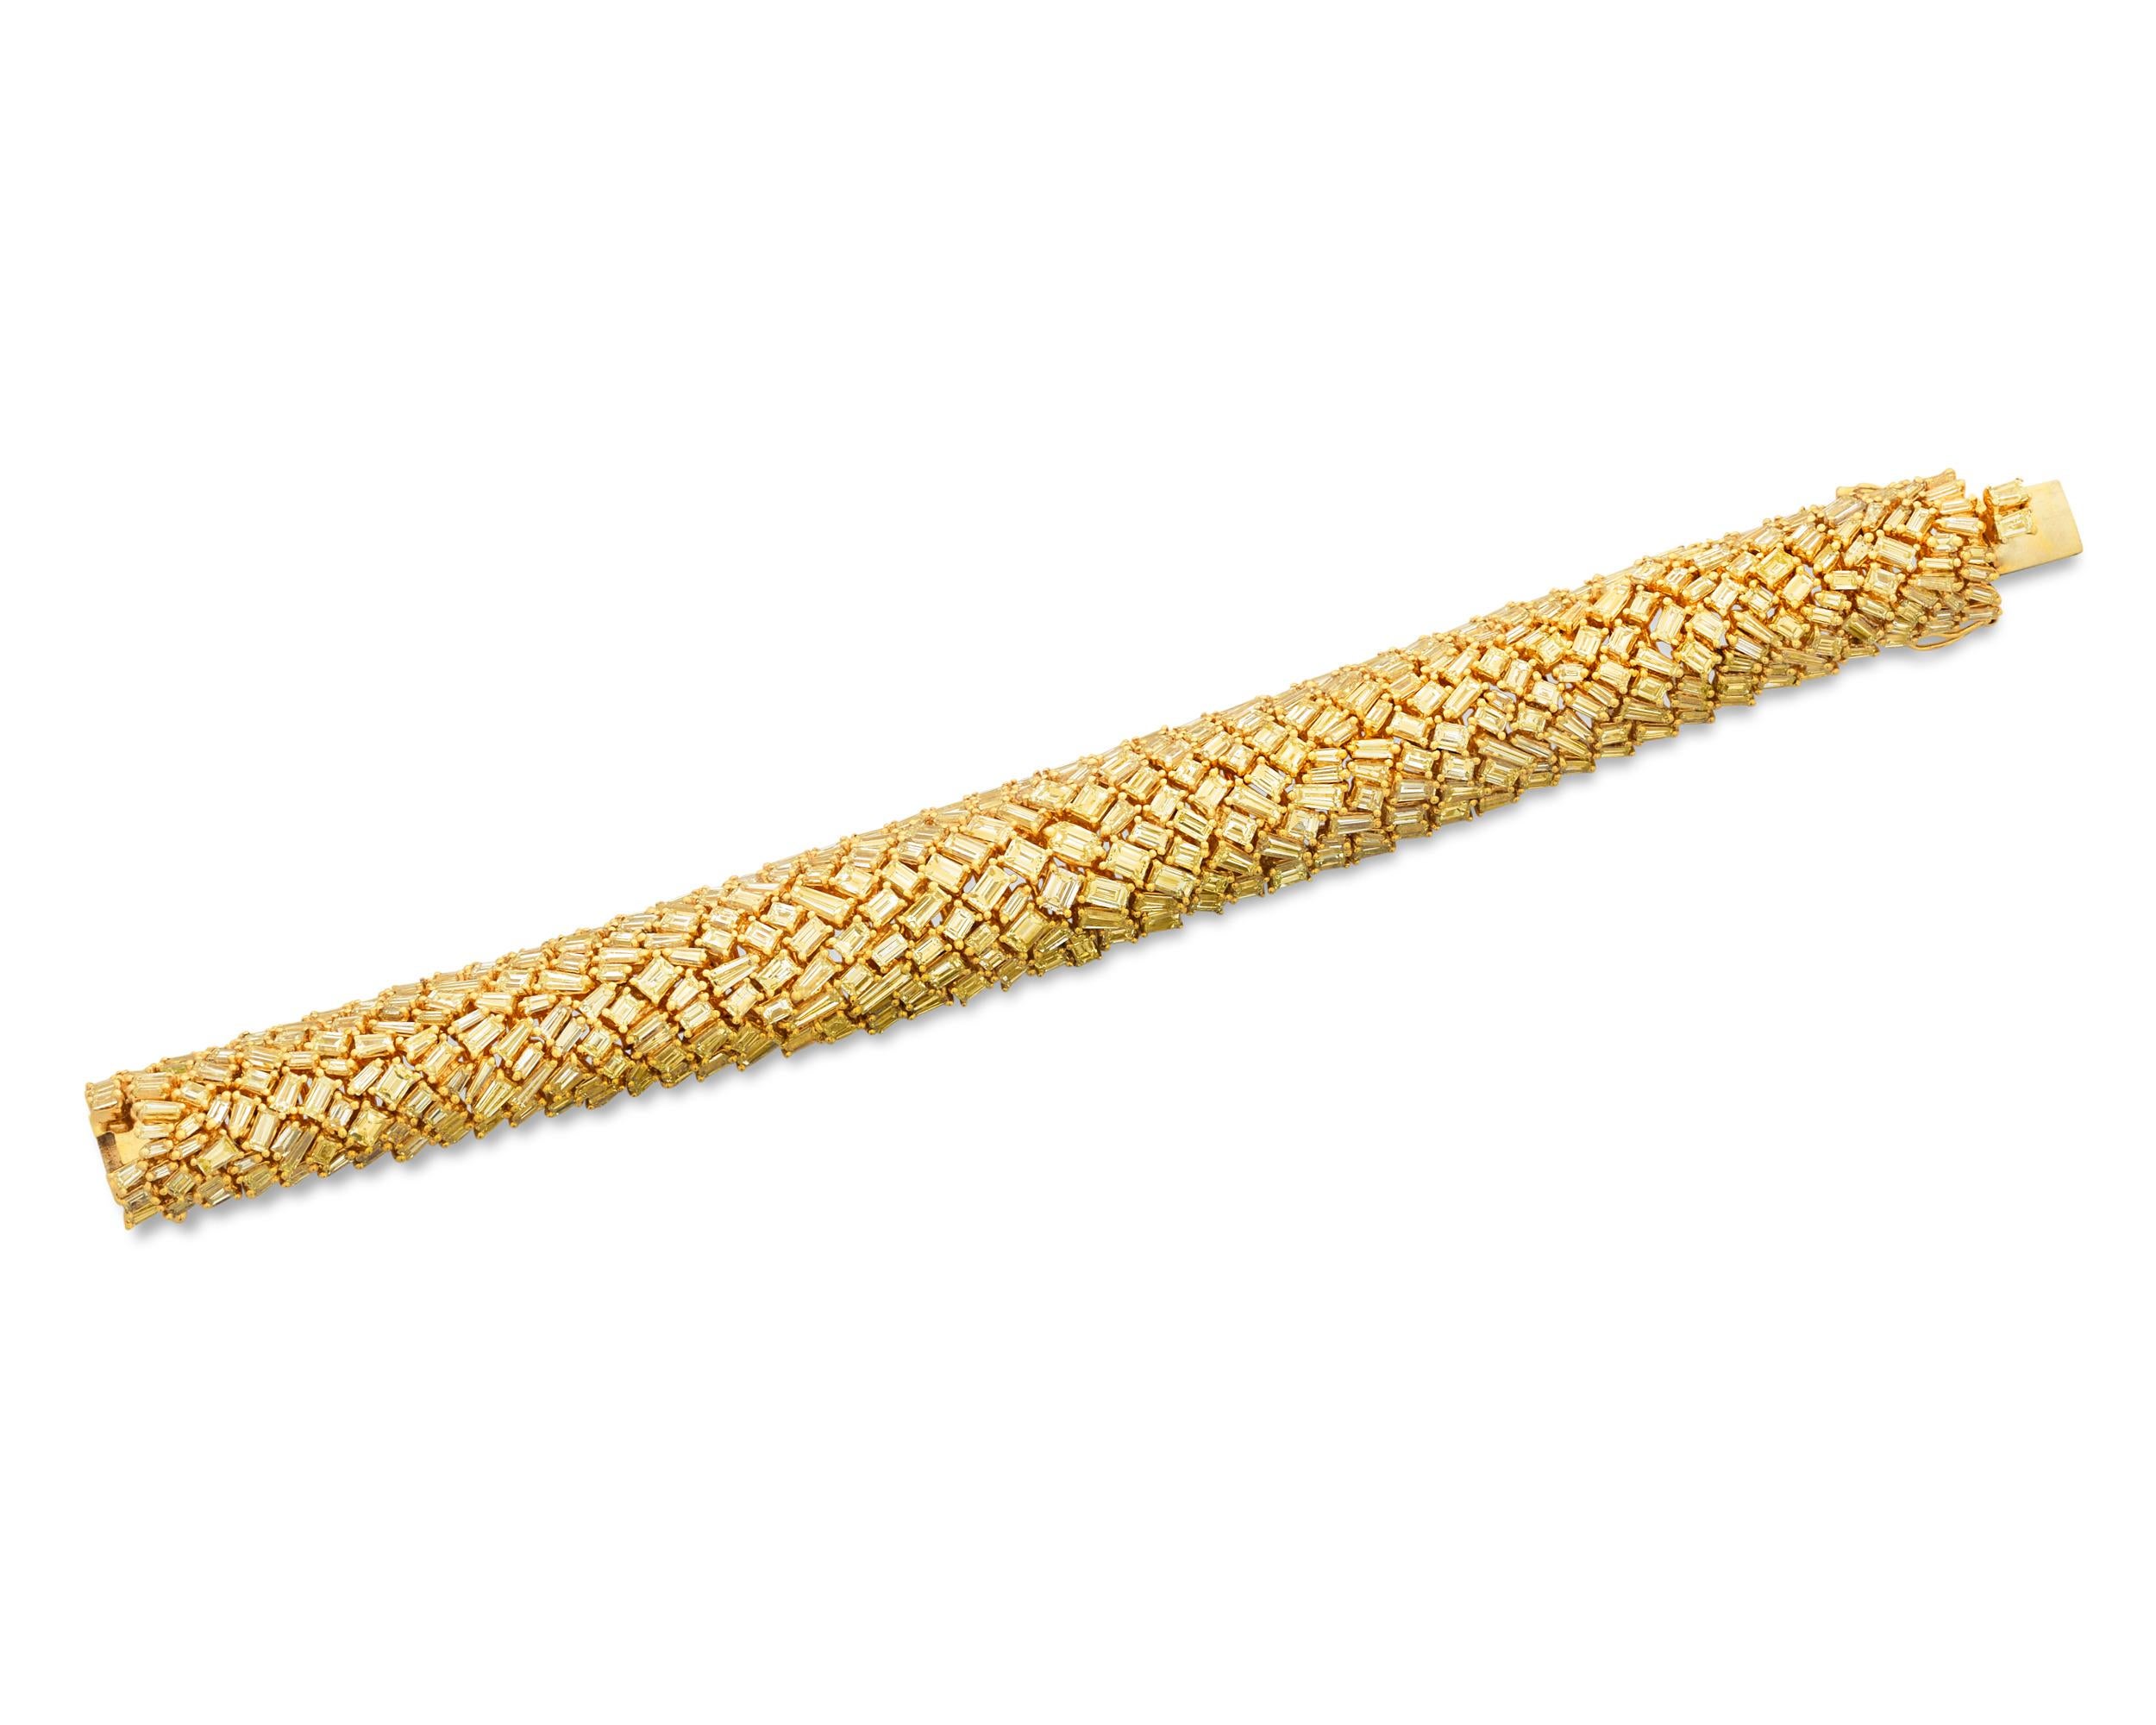 An array of beautifully matched yellow diamonds totaling 31.47 carats comprise this stunning bracelet. Set in 18K yellow gold, these vibrant, baguette-cut diamonds are meticulously fit together in a breathtaking diamond mosaic and sparkle with